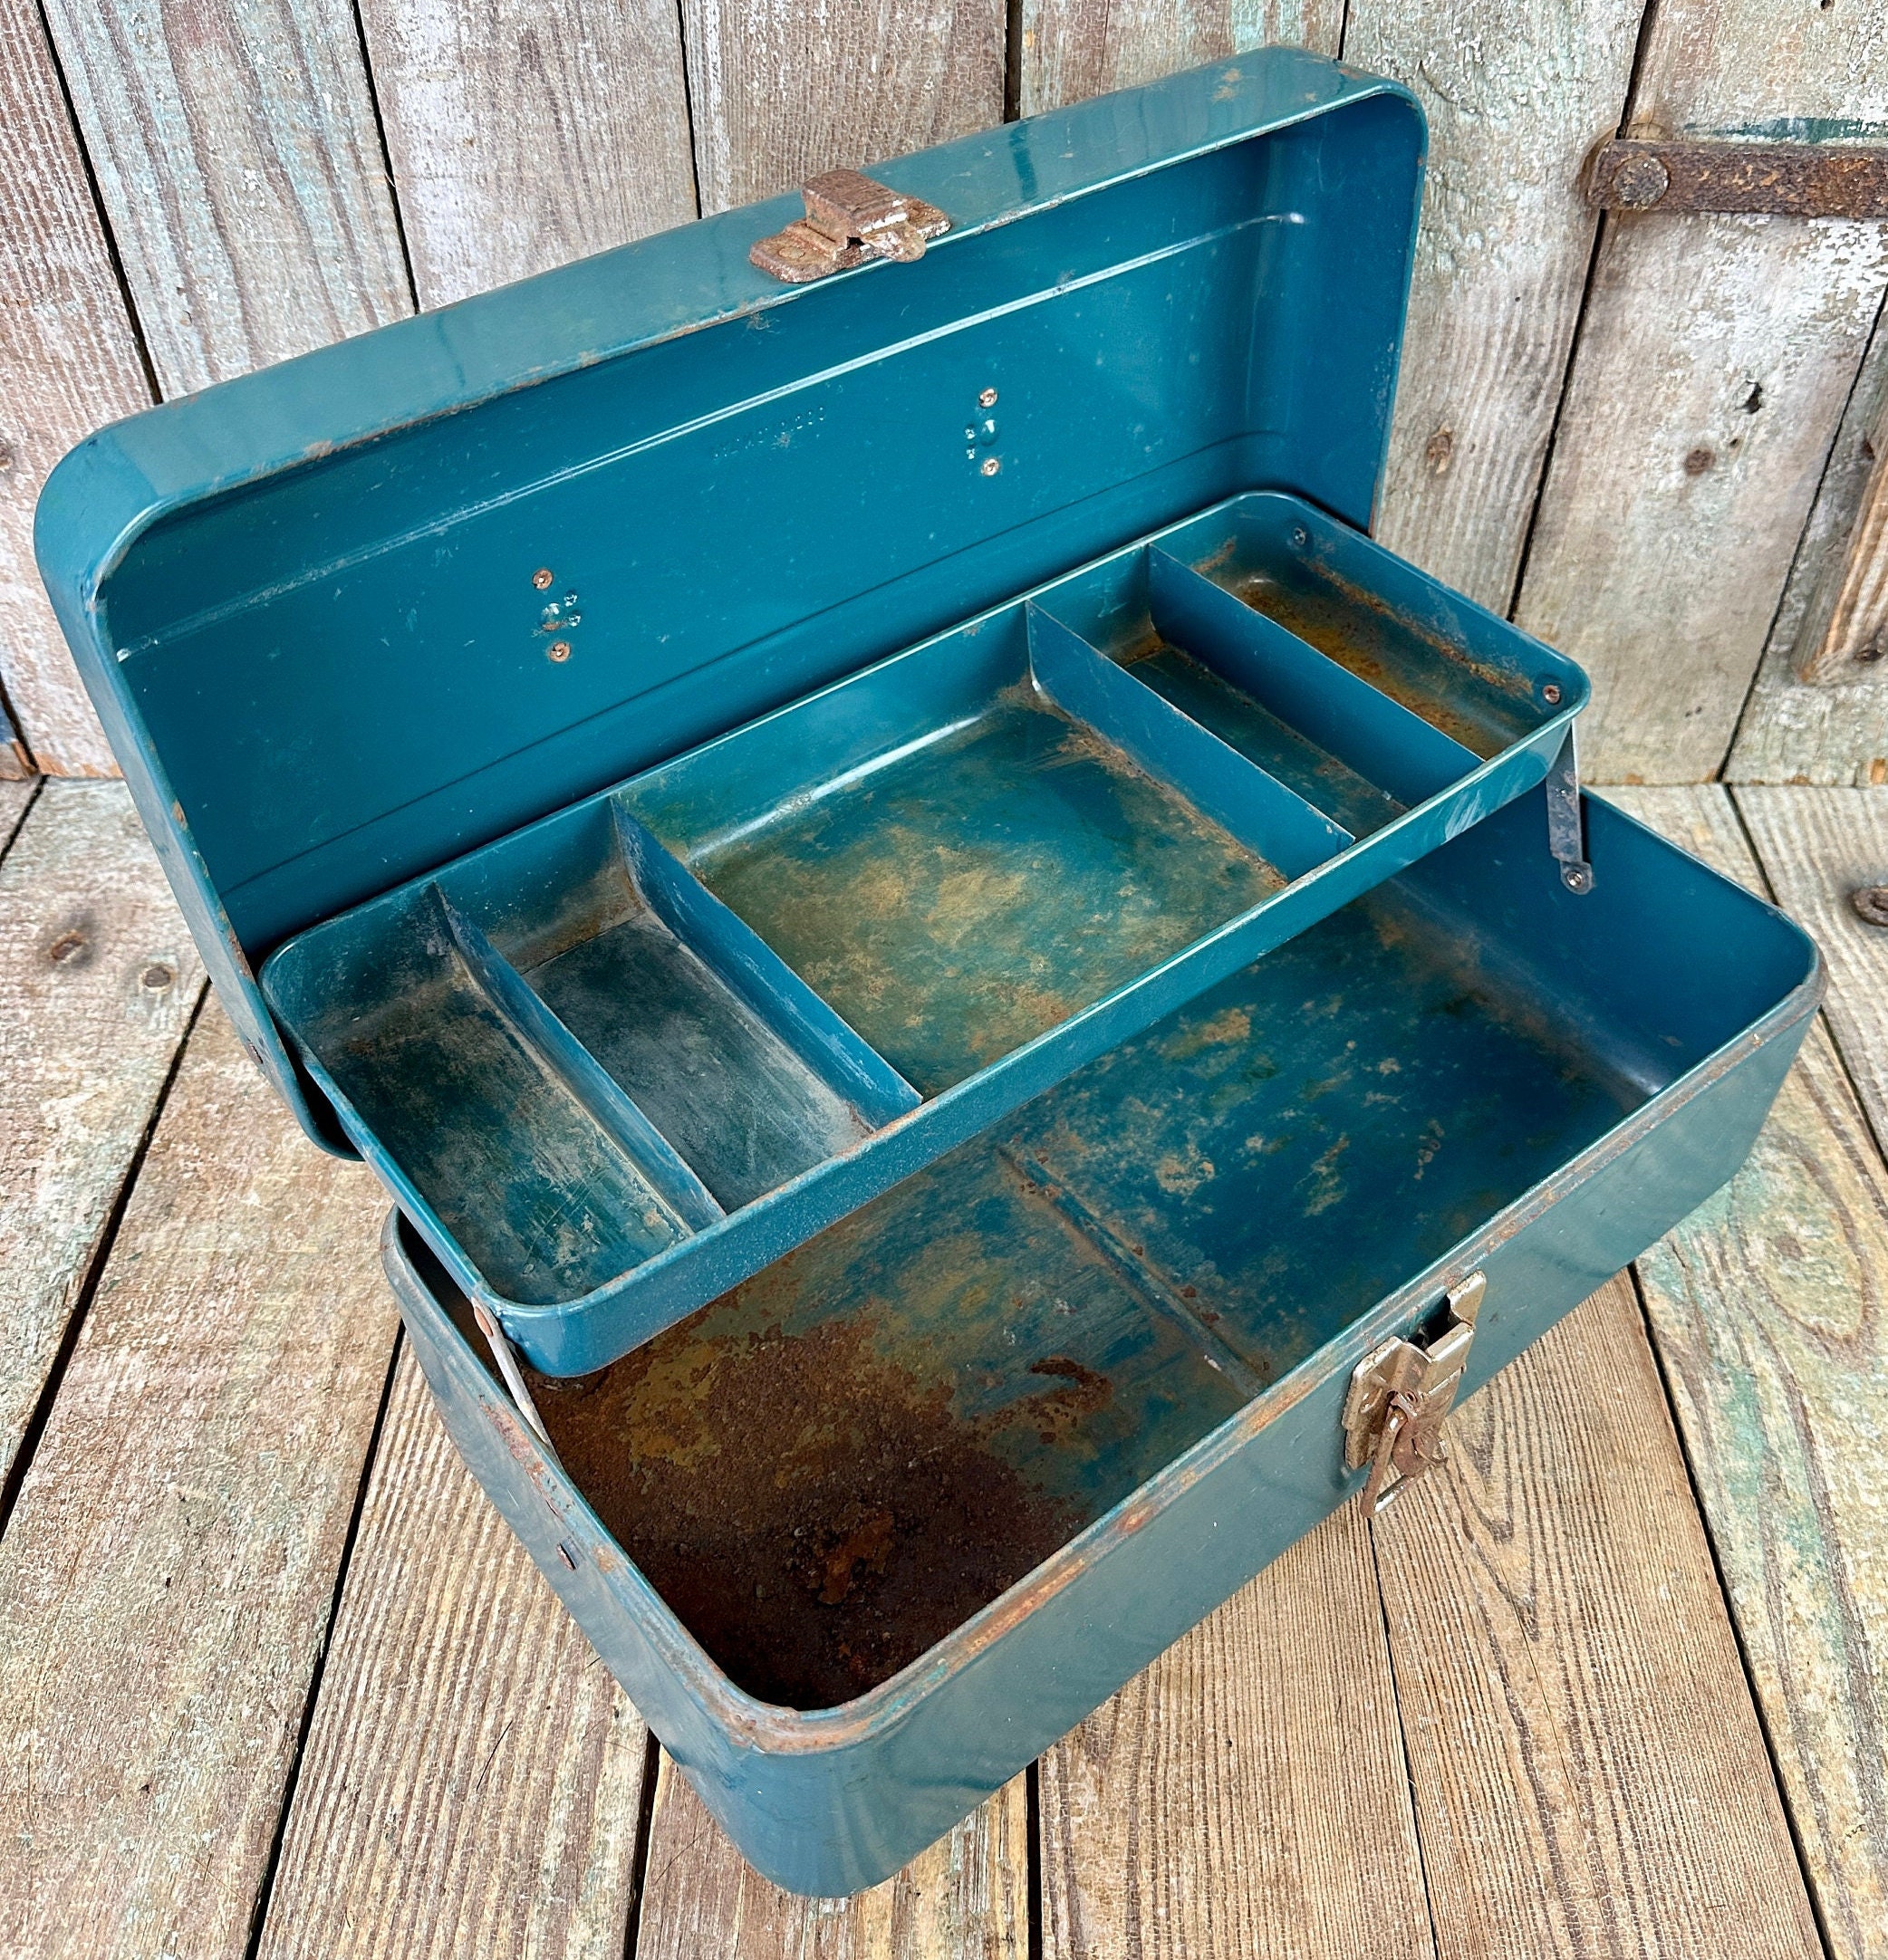 Rusty Old Tackle Box Vintage Metal Fishing Carrying Case Repurposed Decor -   Denmark